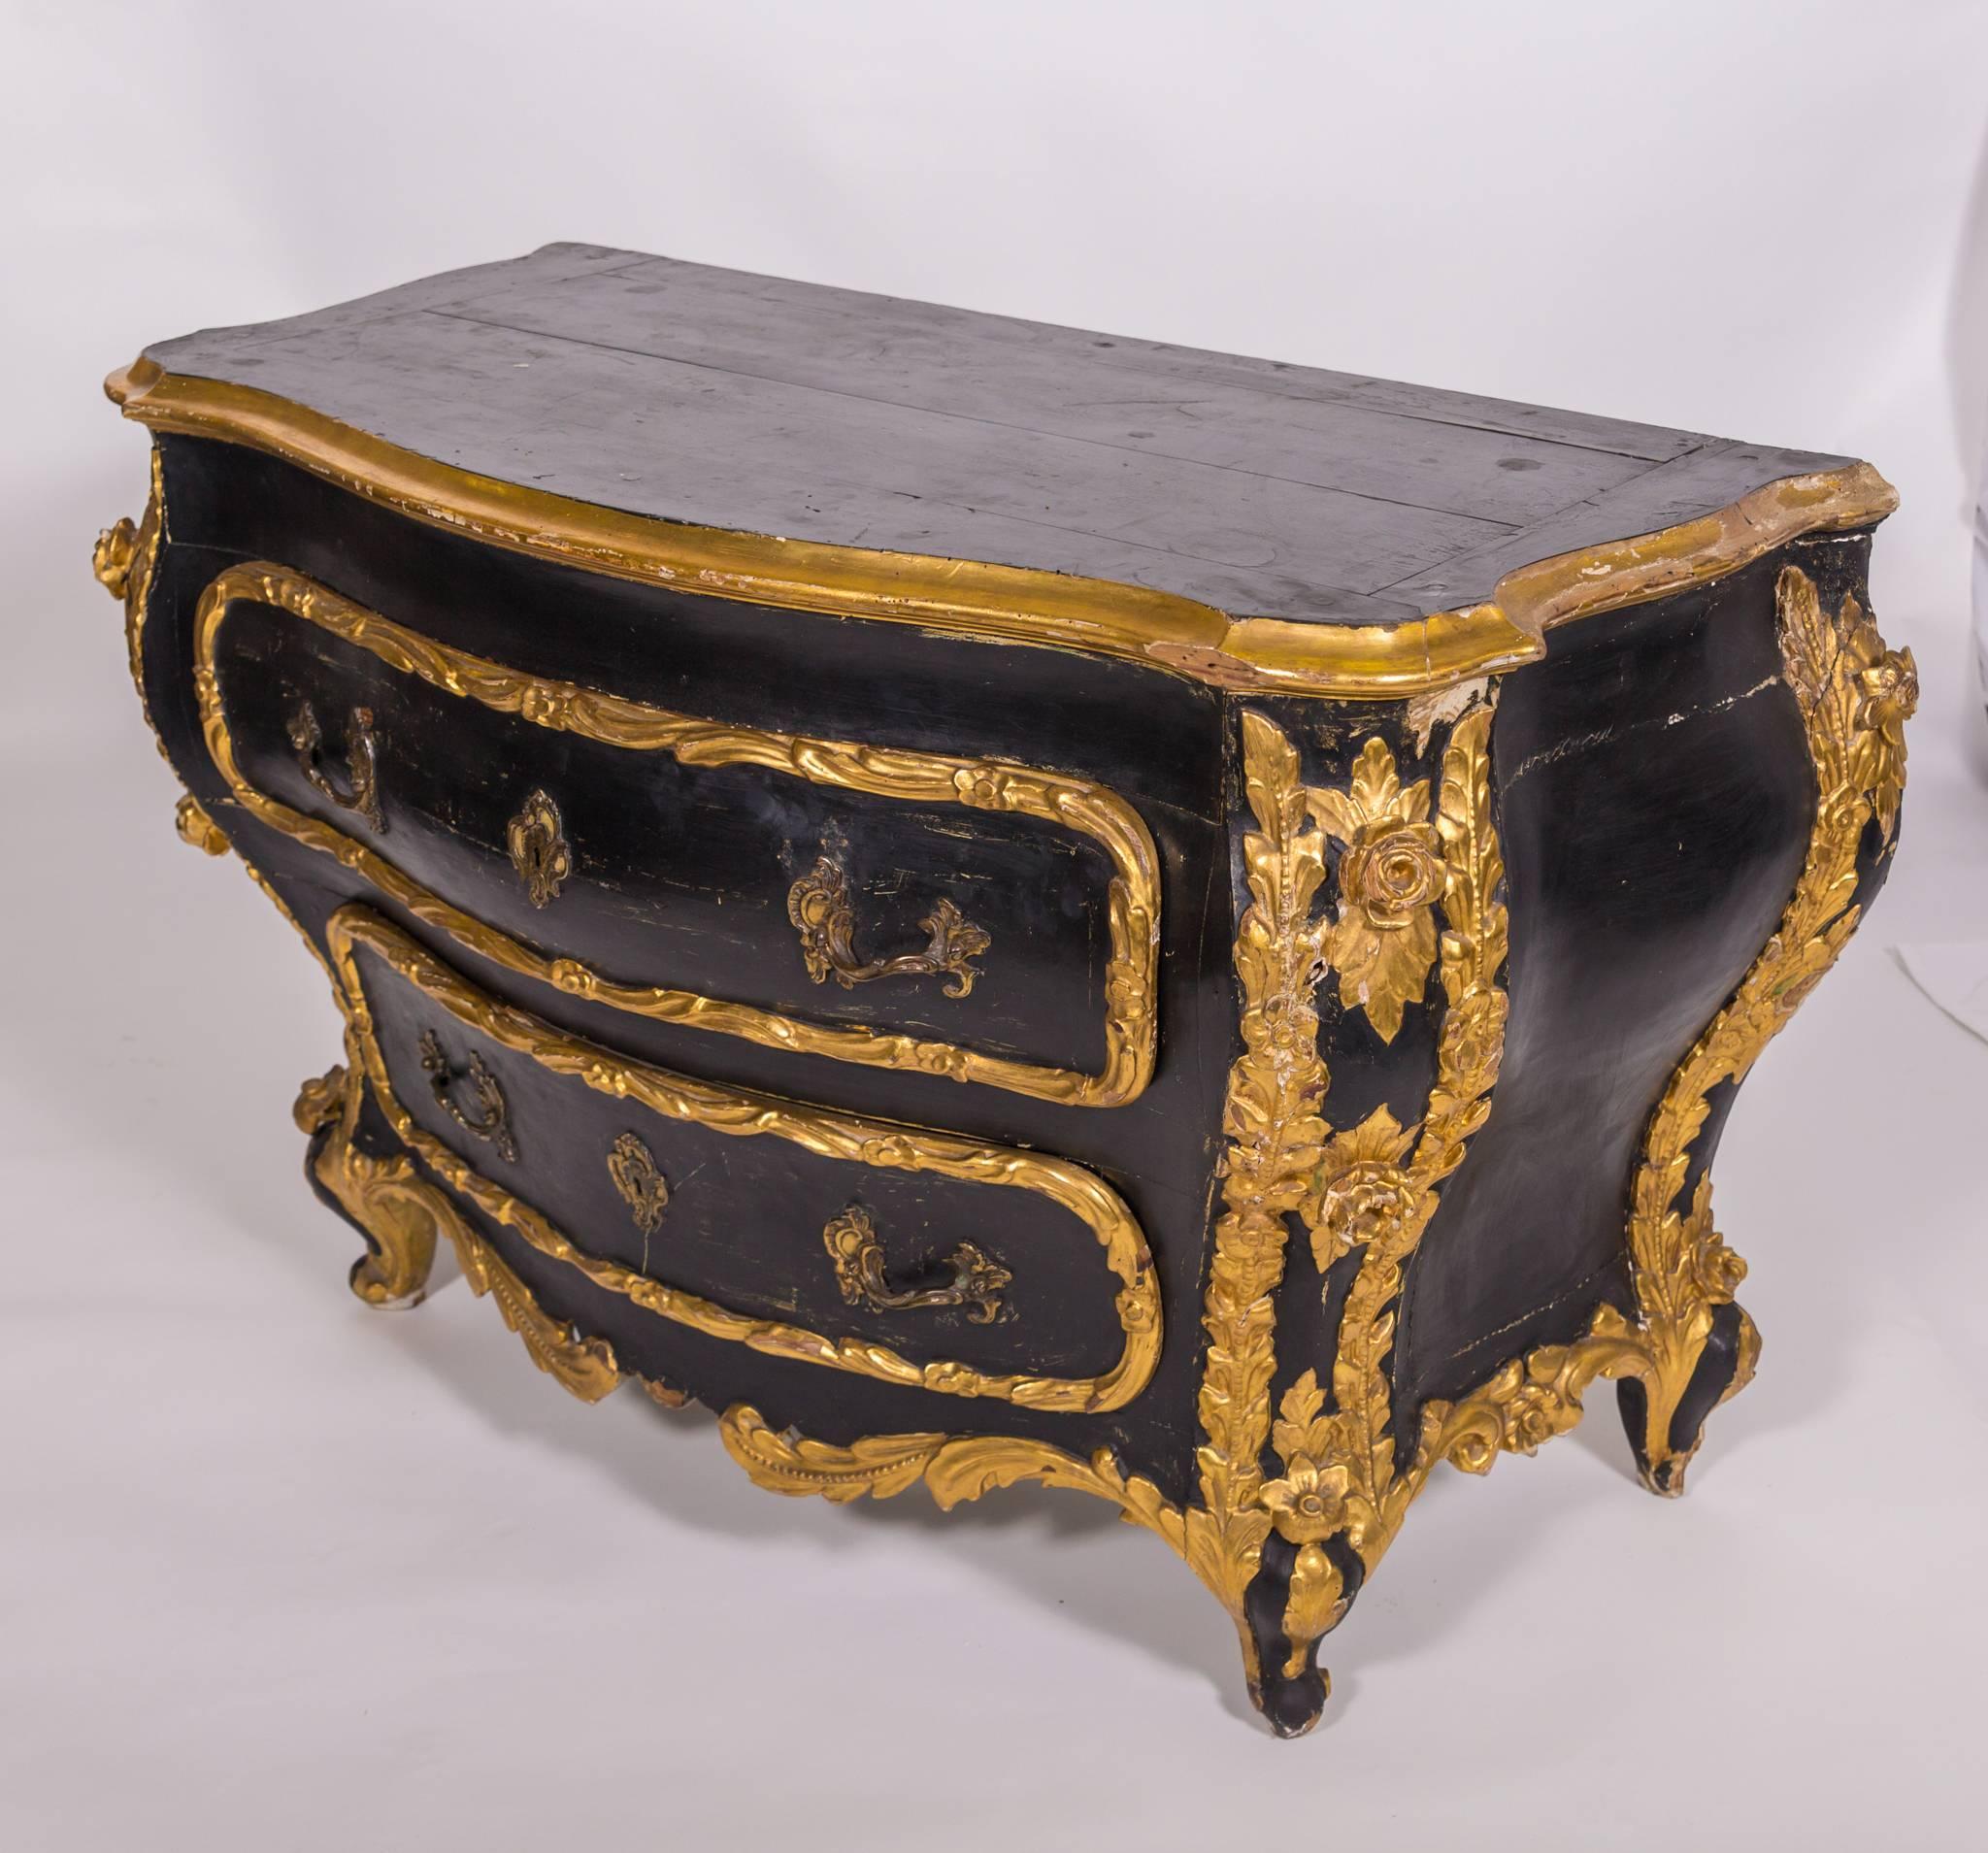 This Vintage Italian painted chest with gilded detail is a true statement piece. The
contrasting black-painted body and gilded carved details on this vintage Italian chest is instantly striking. There is plenty of storage for use in a bedroom or